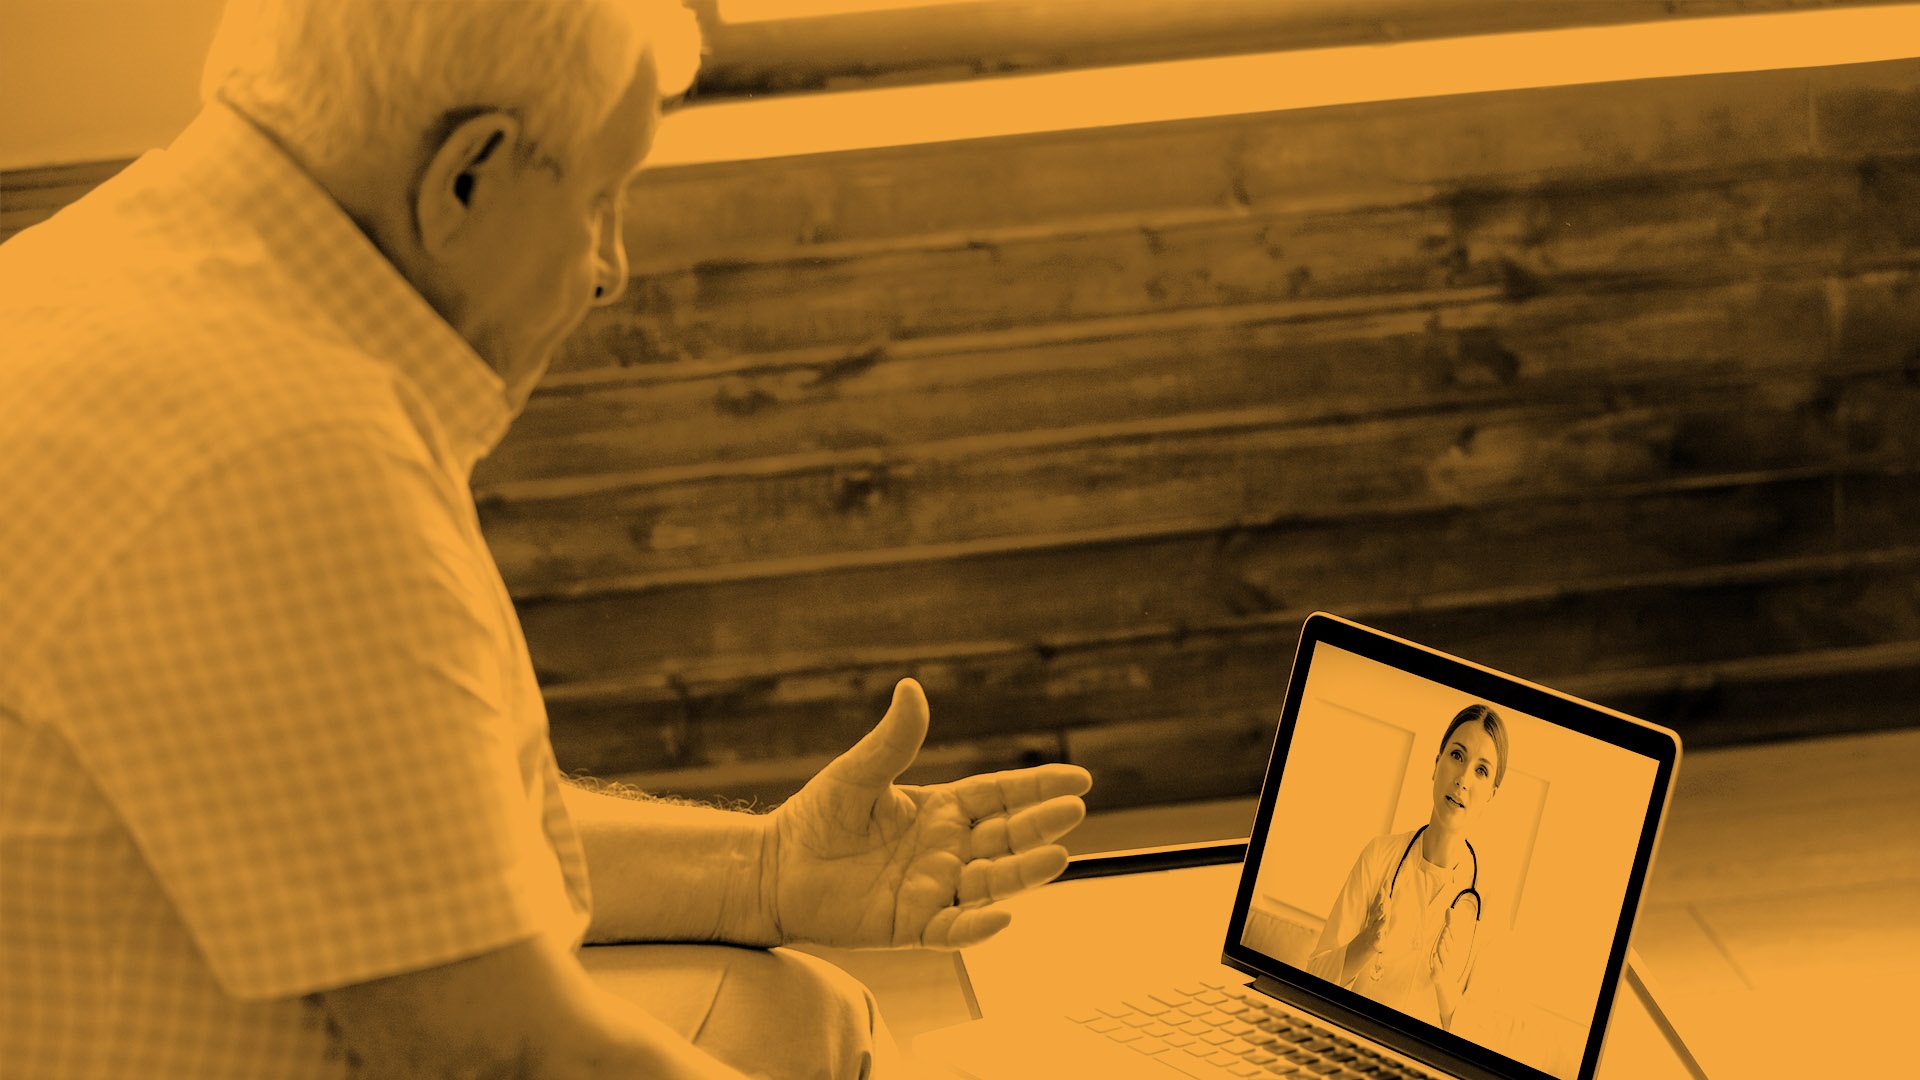 How can telehealth help lower risks during a public health crisis?